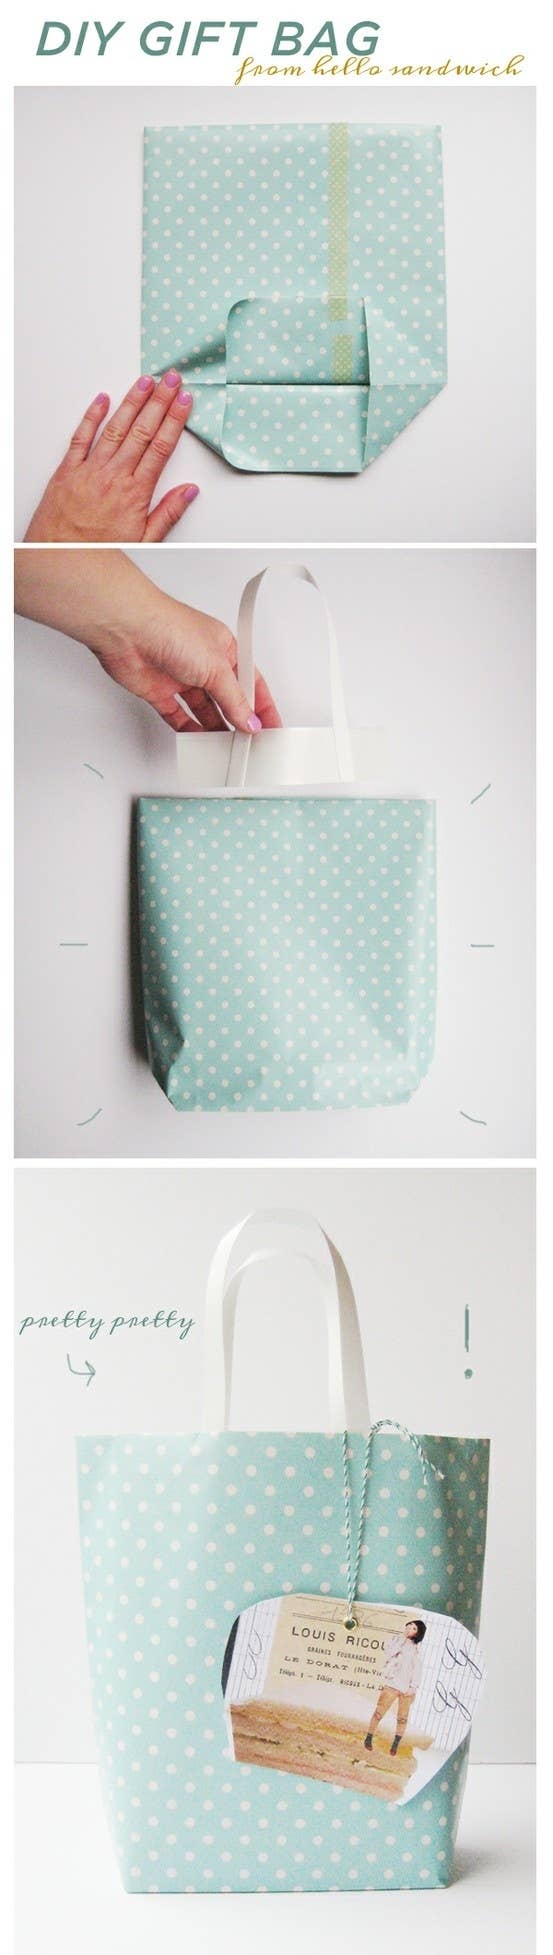 32 Adorable Gifts Almost Too Cute To Cover With Wrapping Paper